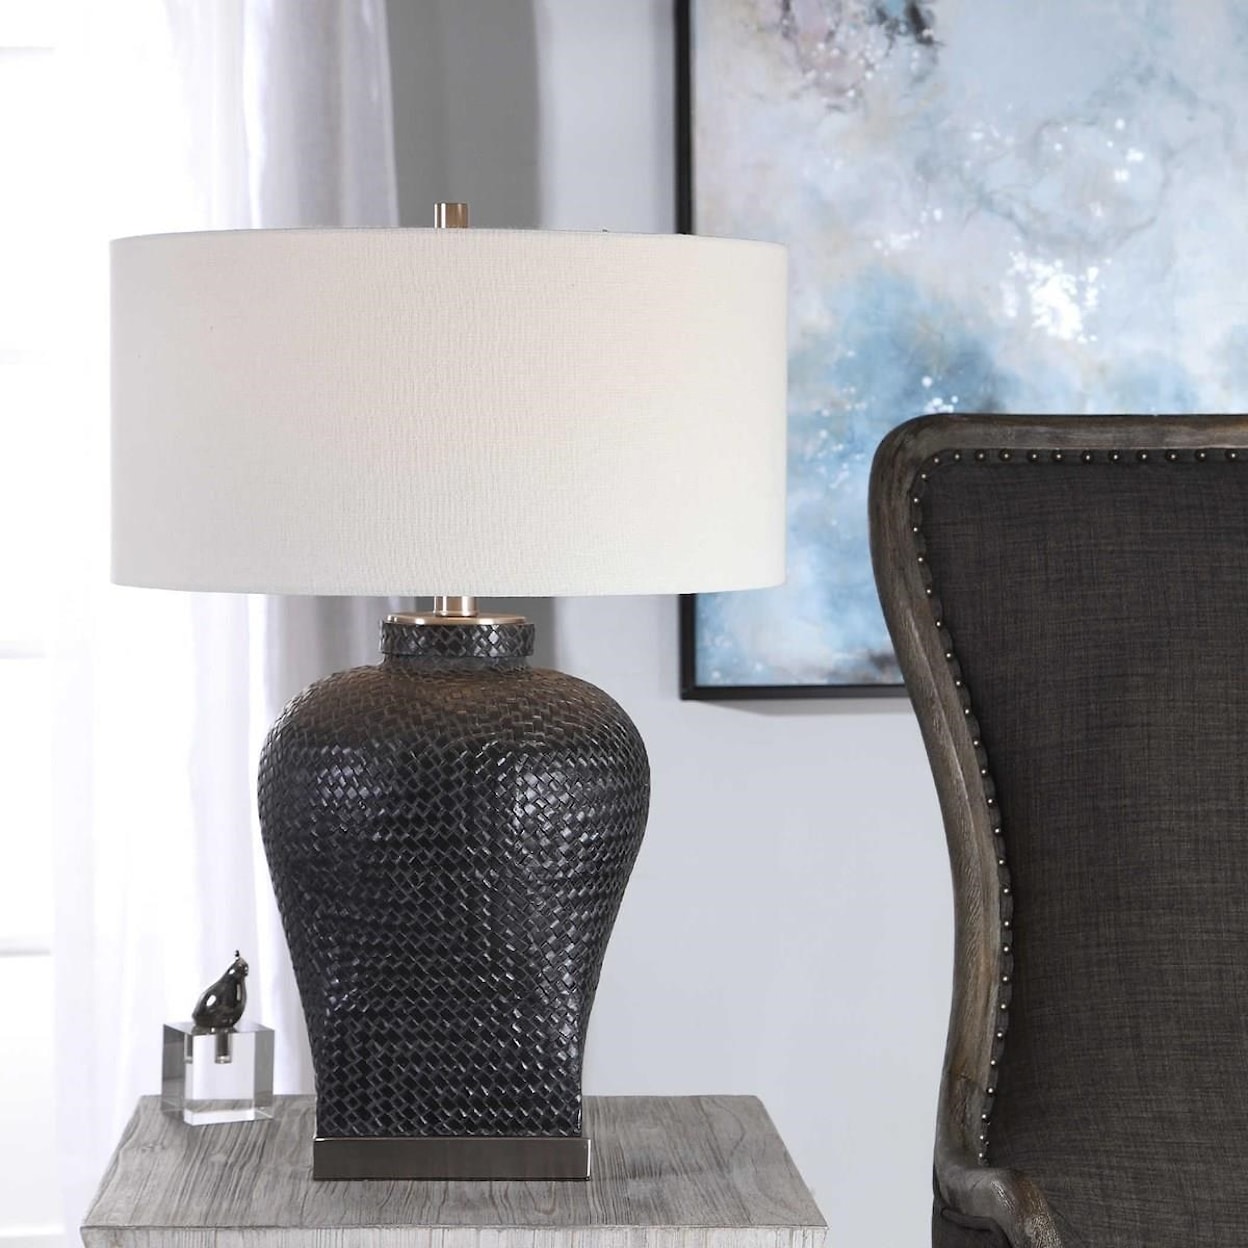 Uttermost Table Lamps Akello Weave Texture Table Lamp